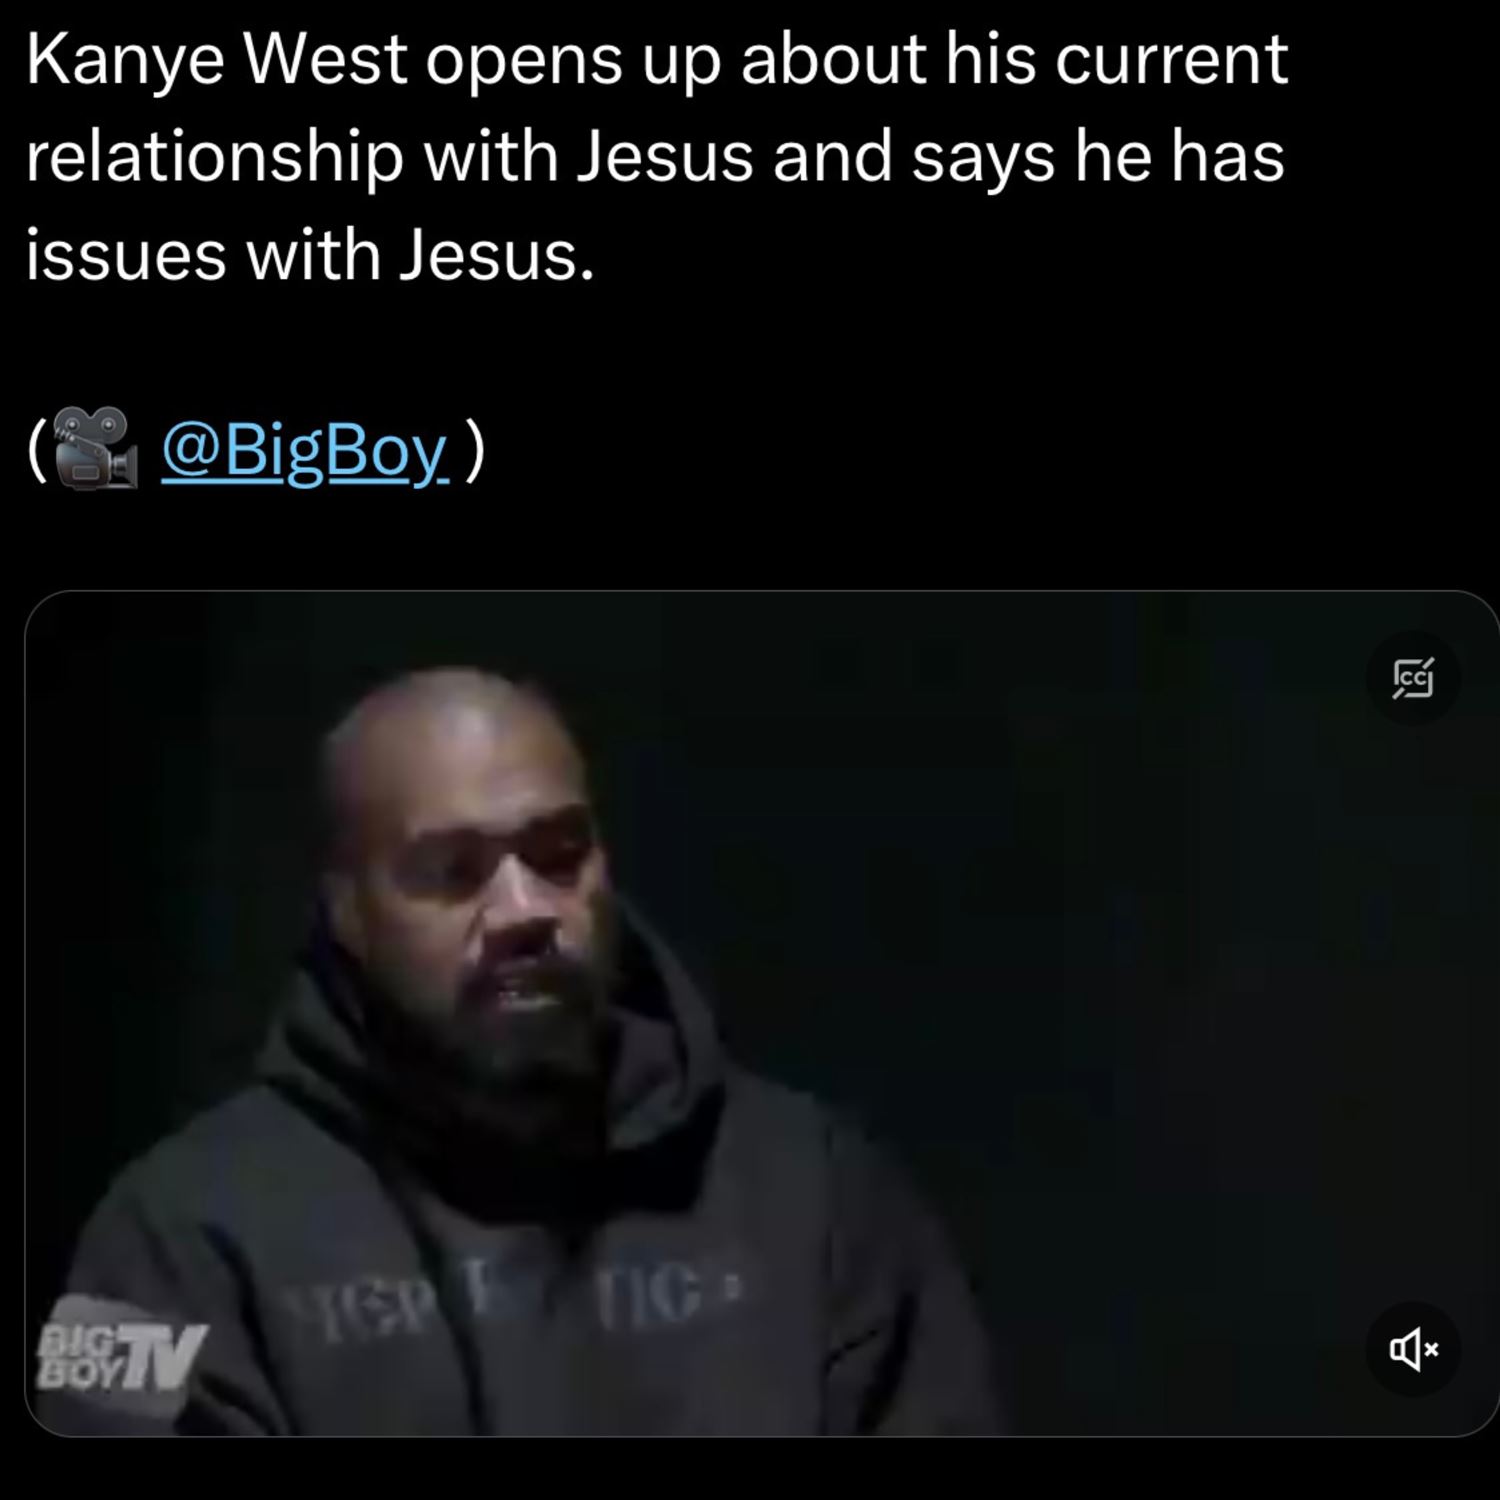 Ye has issues with Jesus